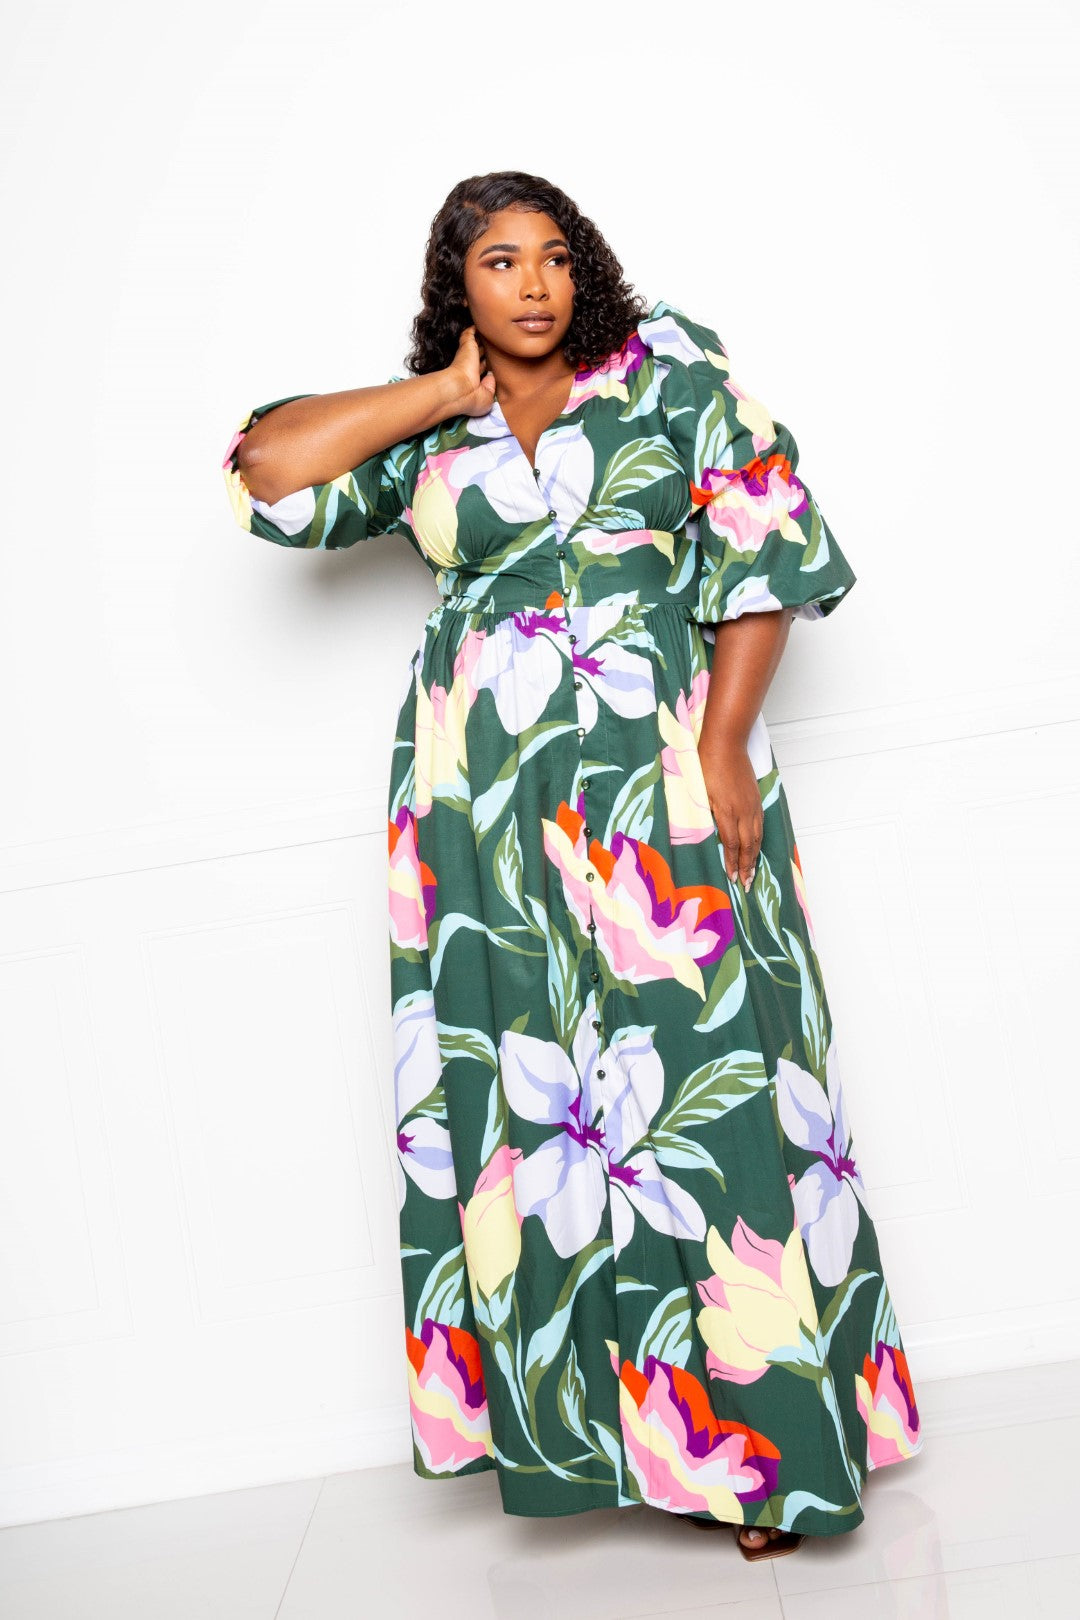 Puff Sleeve Button Front Dress | Black Multi, Olive Multi, PLUS SIZE, PLUS SIZE DRESSES, SALE, SALE PLUS SIZE, White Multi | Style Your Curves